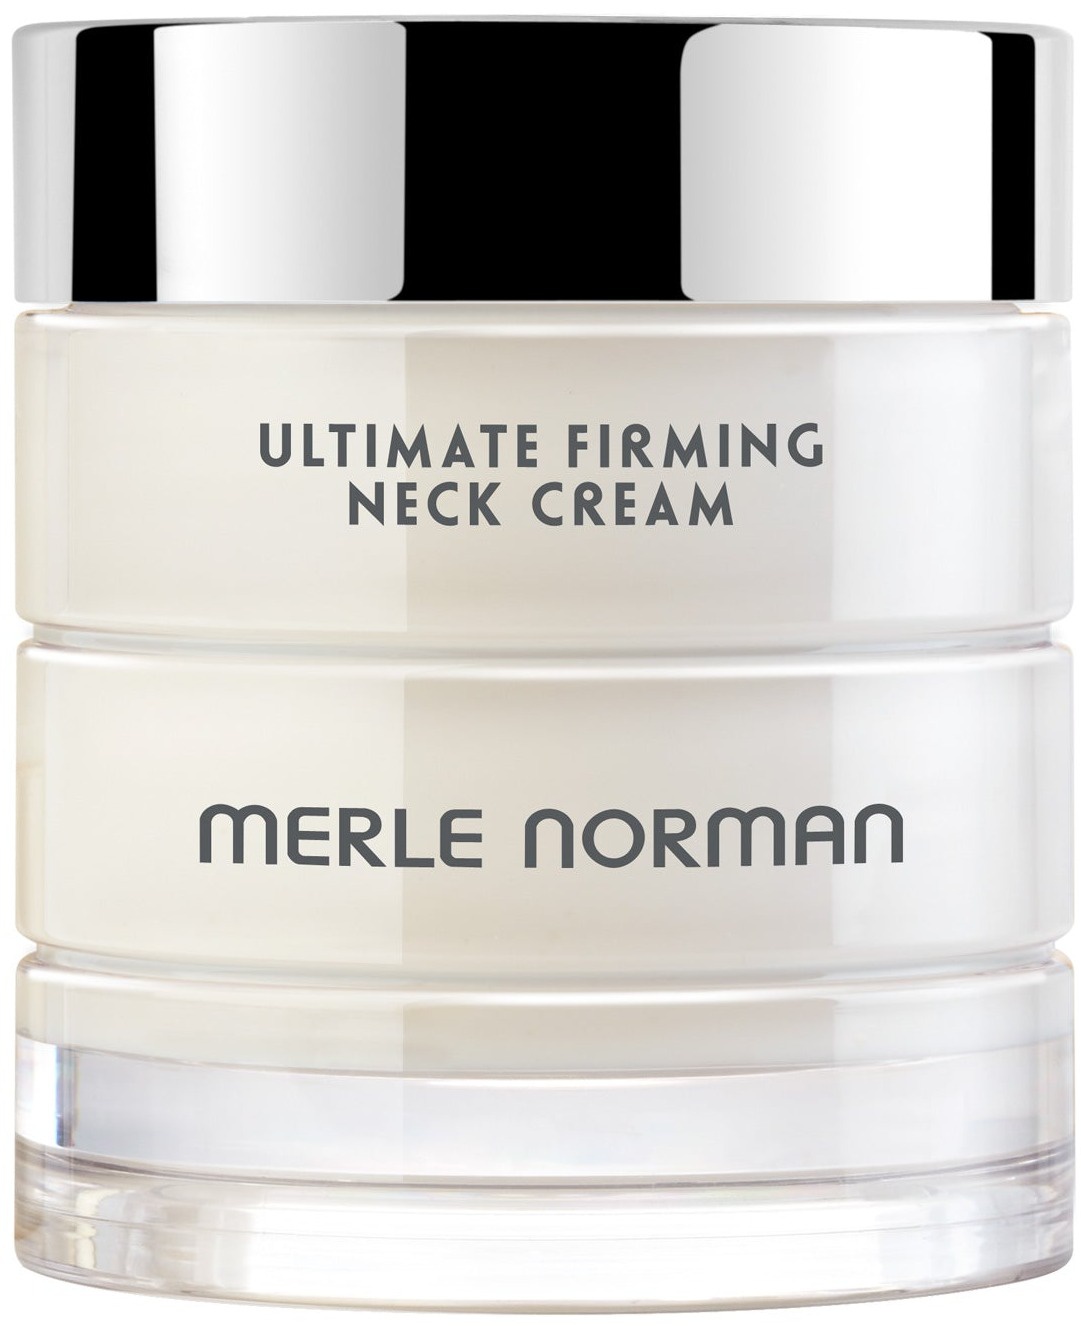 Merle Norman Ultimate Firming Neck Cream